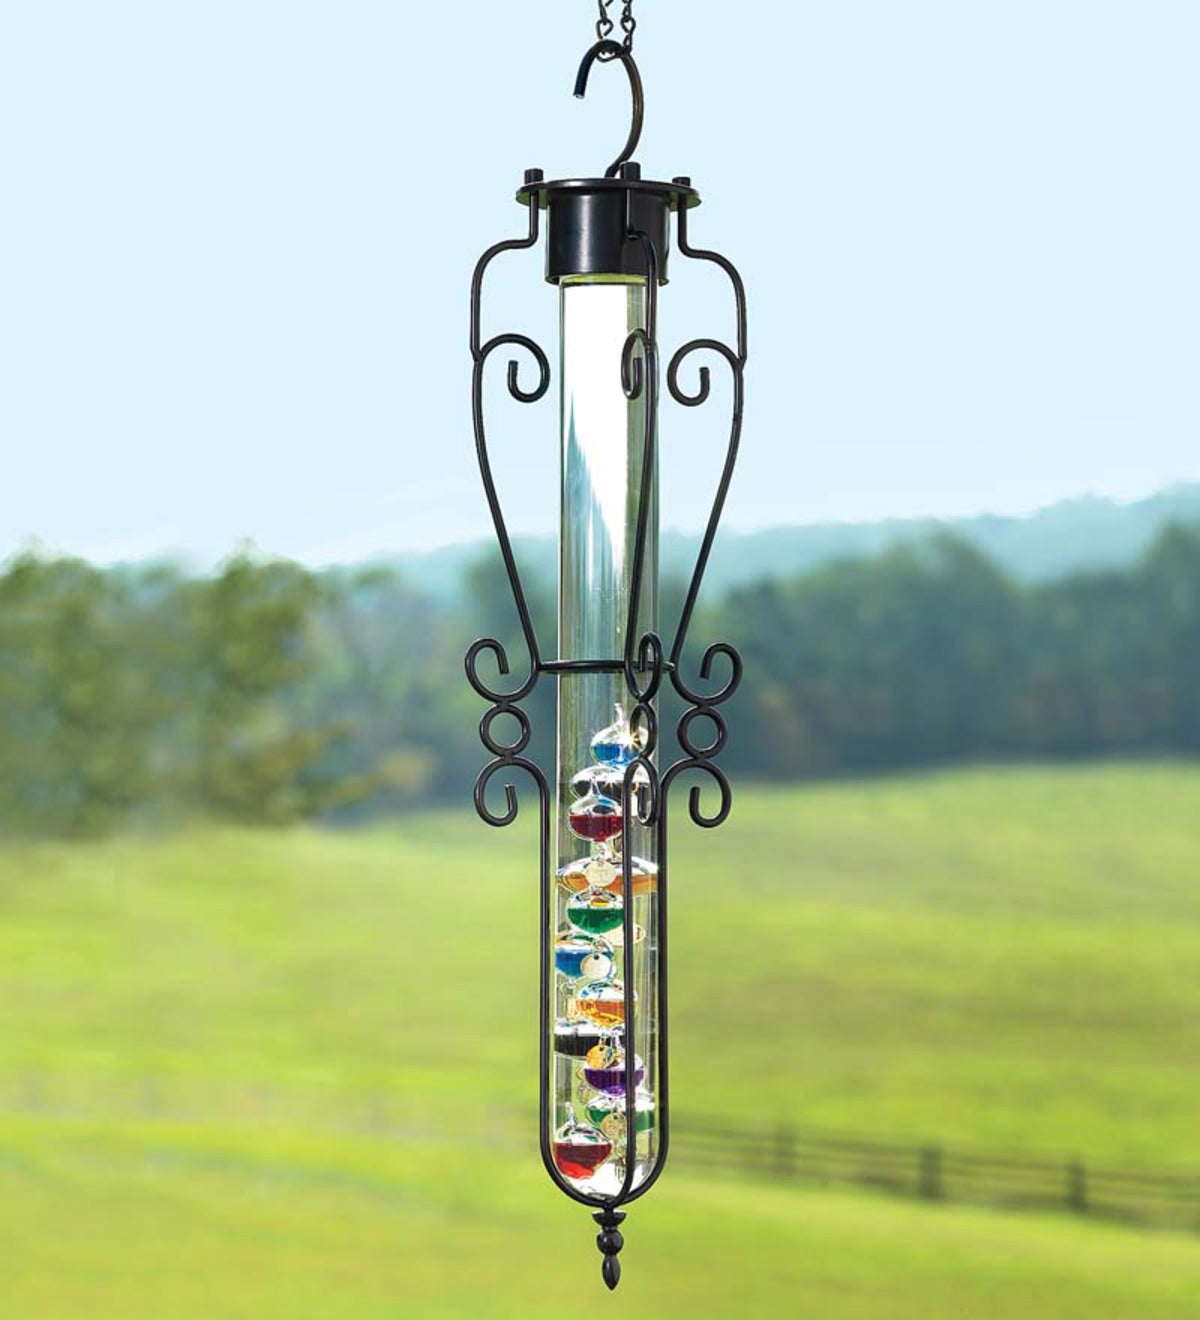 Outdoor Thermometer Hanging High Accuracy Thermometer For Garden